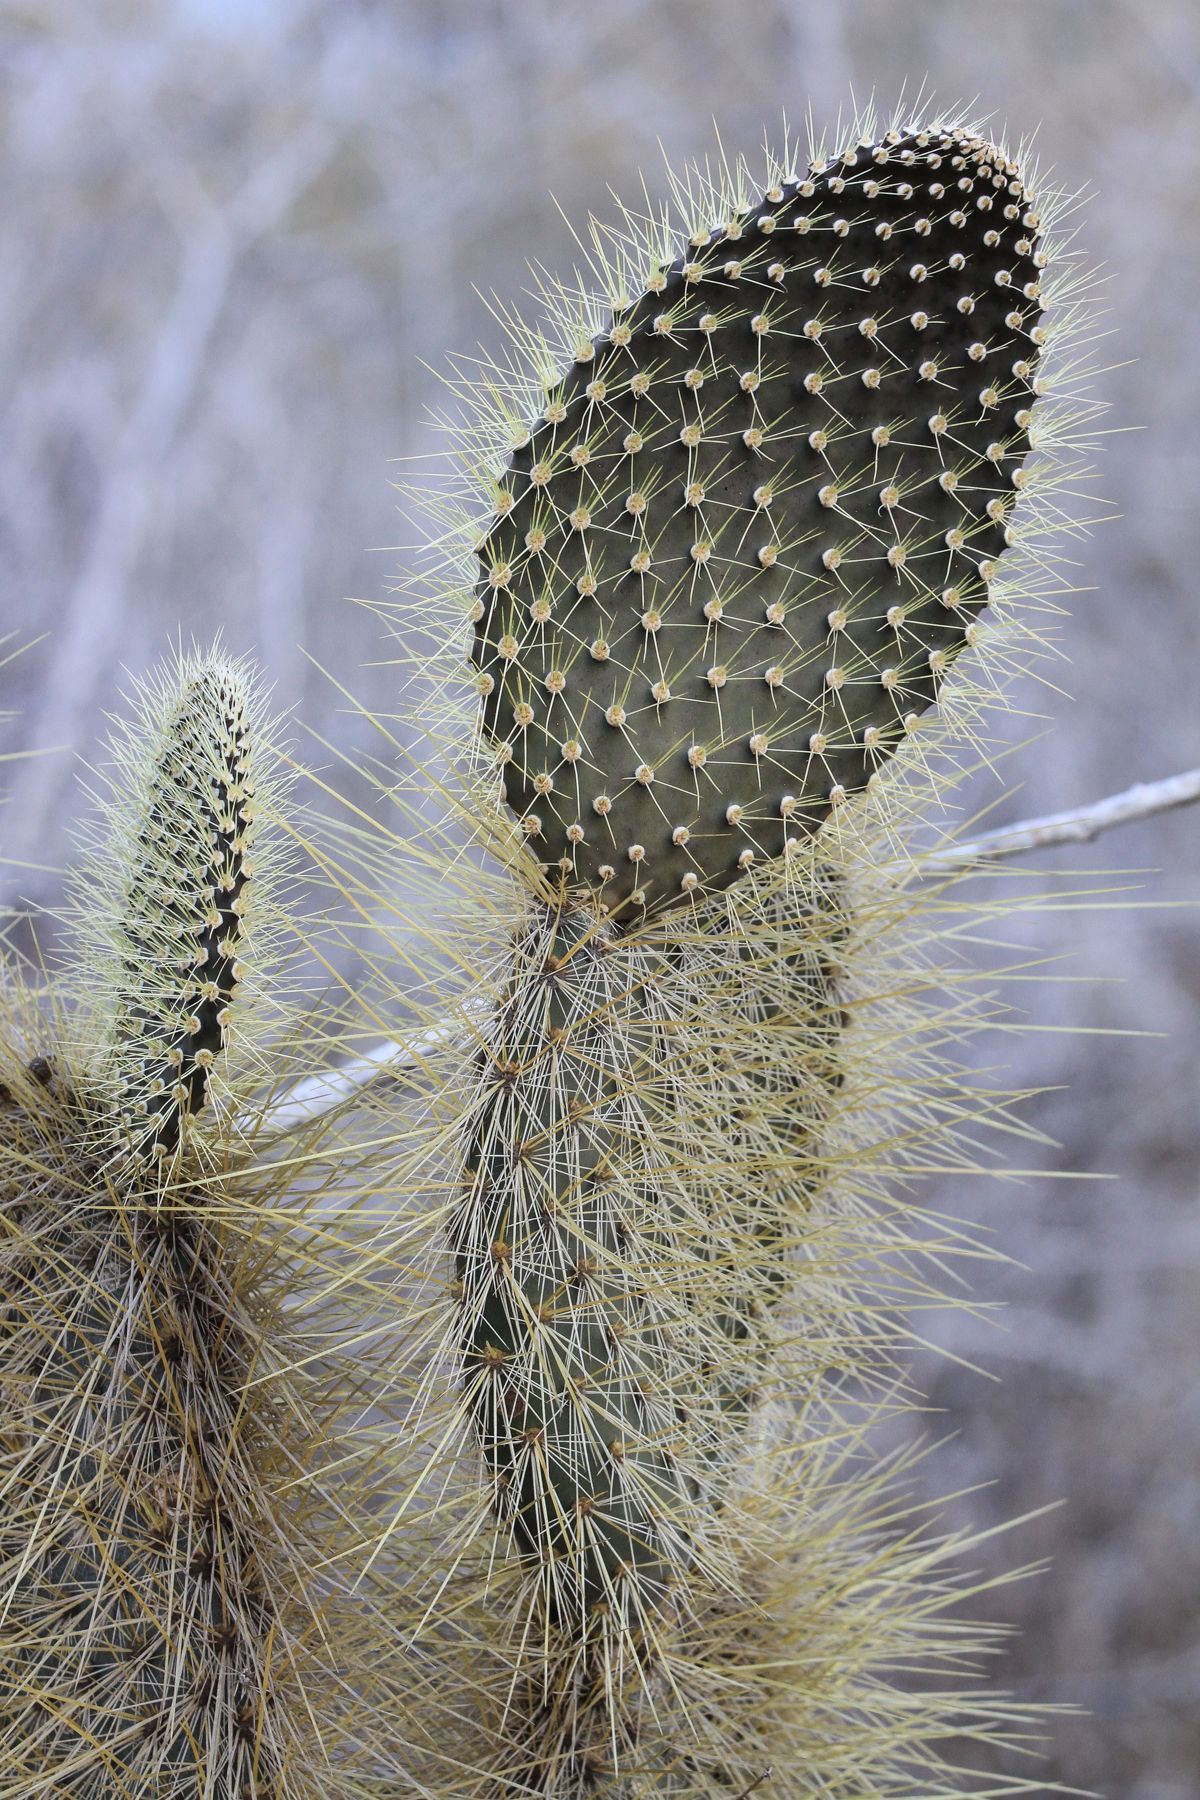 The Galapagos have many endemic plants, including a variety of prickly pears (Opuntia species)